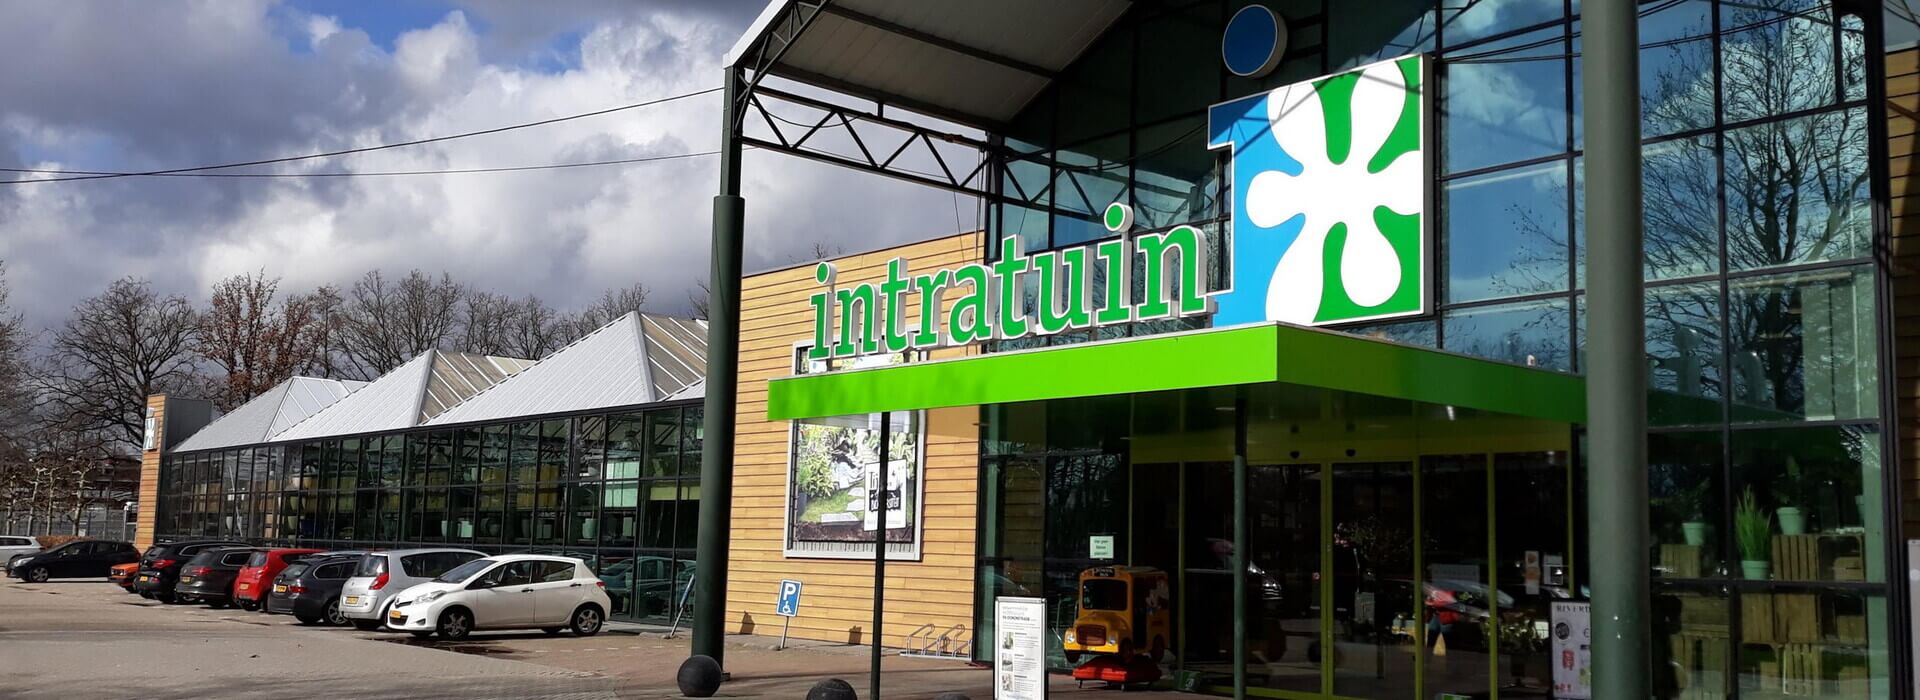 Expansion Intratuin, Amersfoort (the Netherlands) 2019